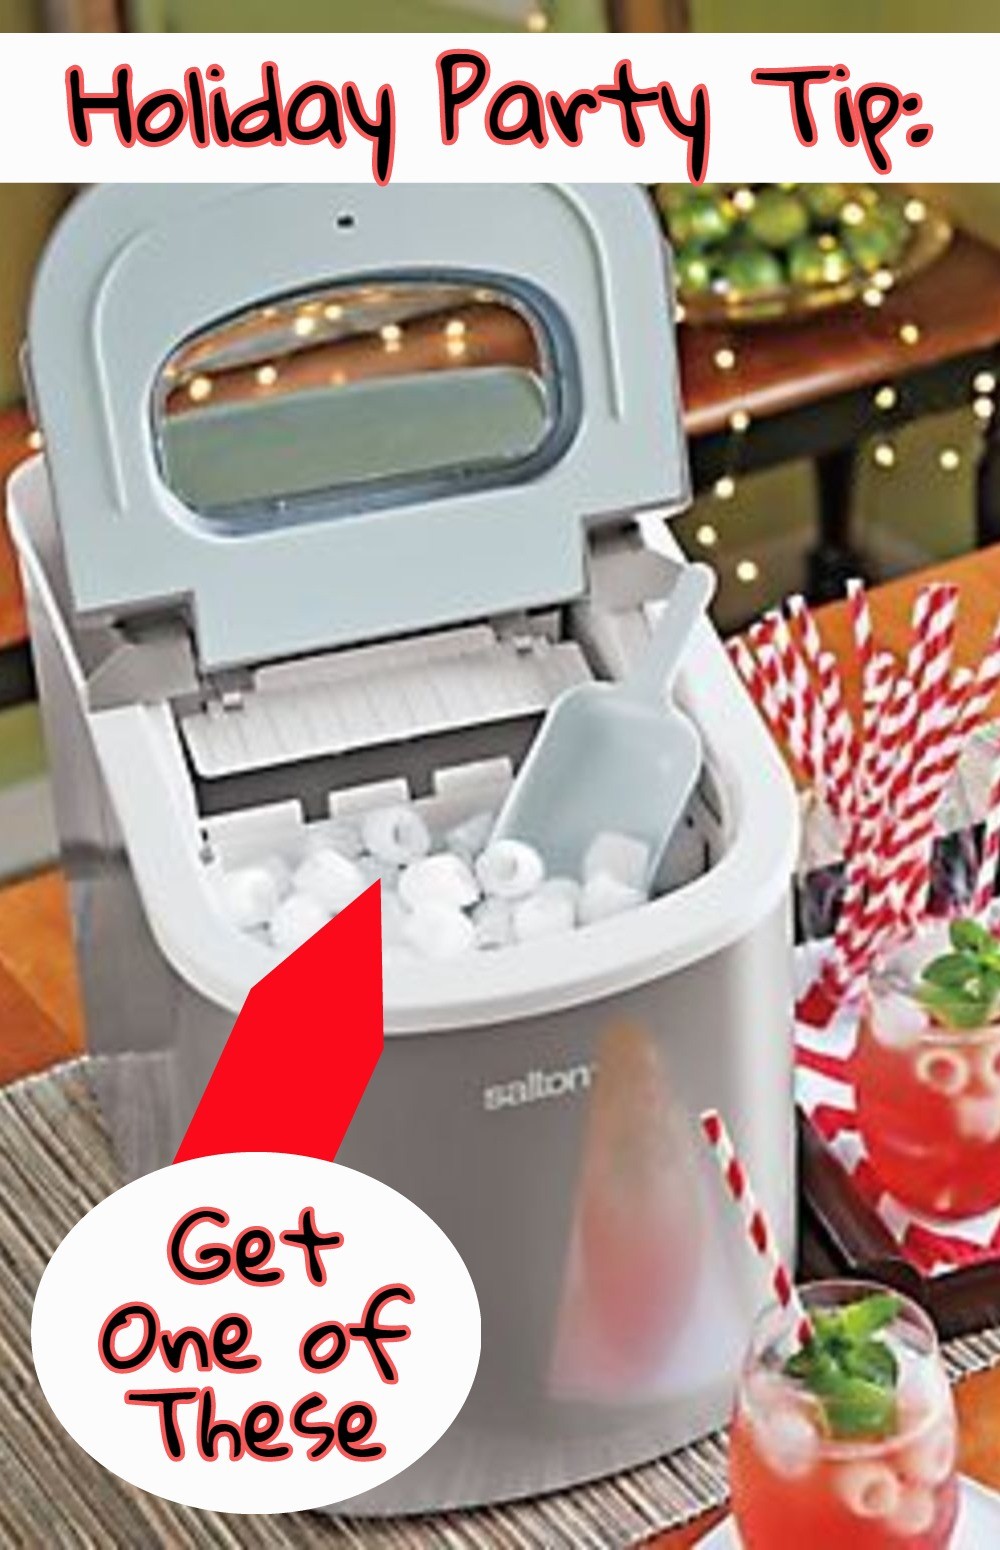 Holiday Party Tip - GET A PORTABLE ICE MAKER!  Seriously, a little countertop ice maker machine is SO handy - you'll never run out of ice!